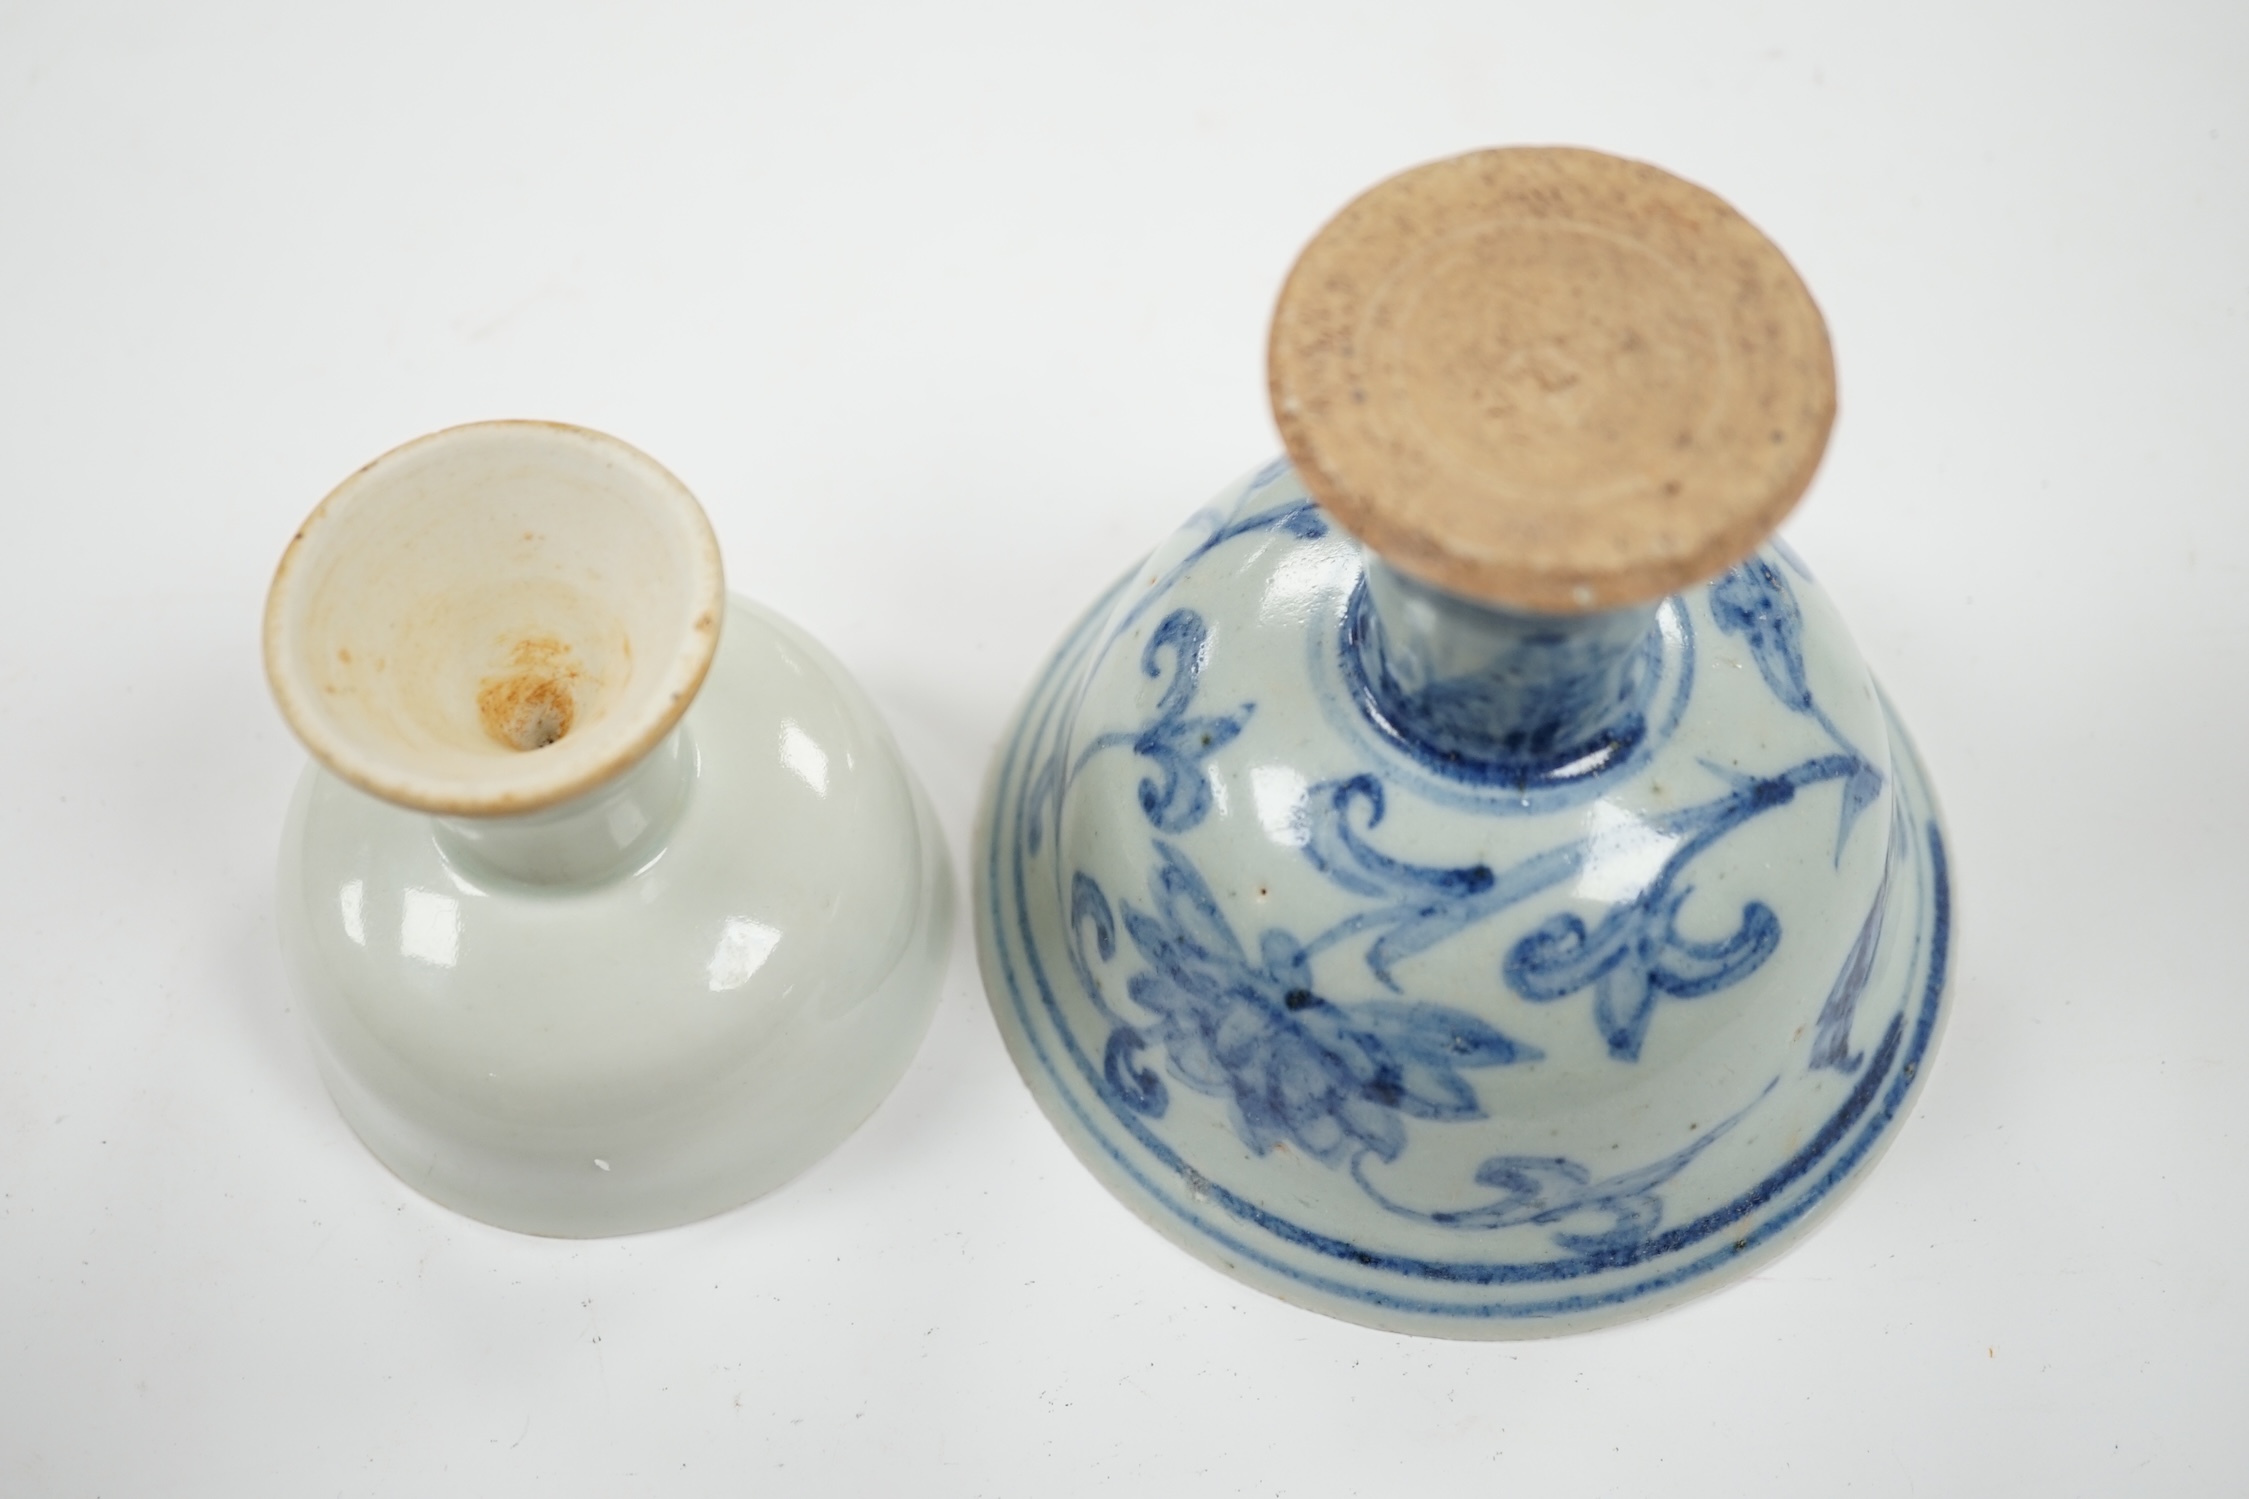 Two Chinese stem cups including a blue and white example, 10.5cm. Condition - fair to good